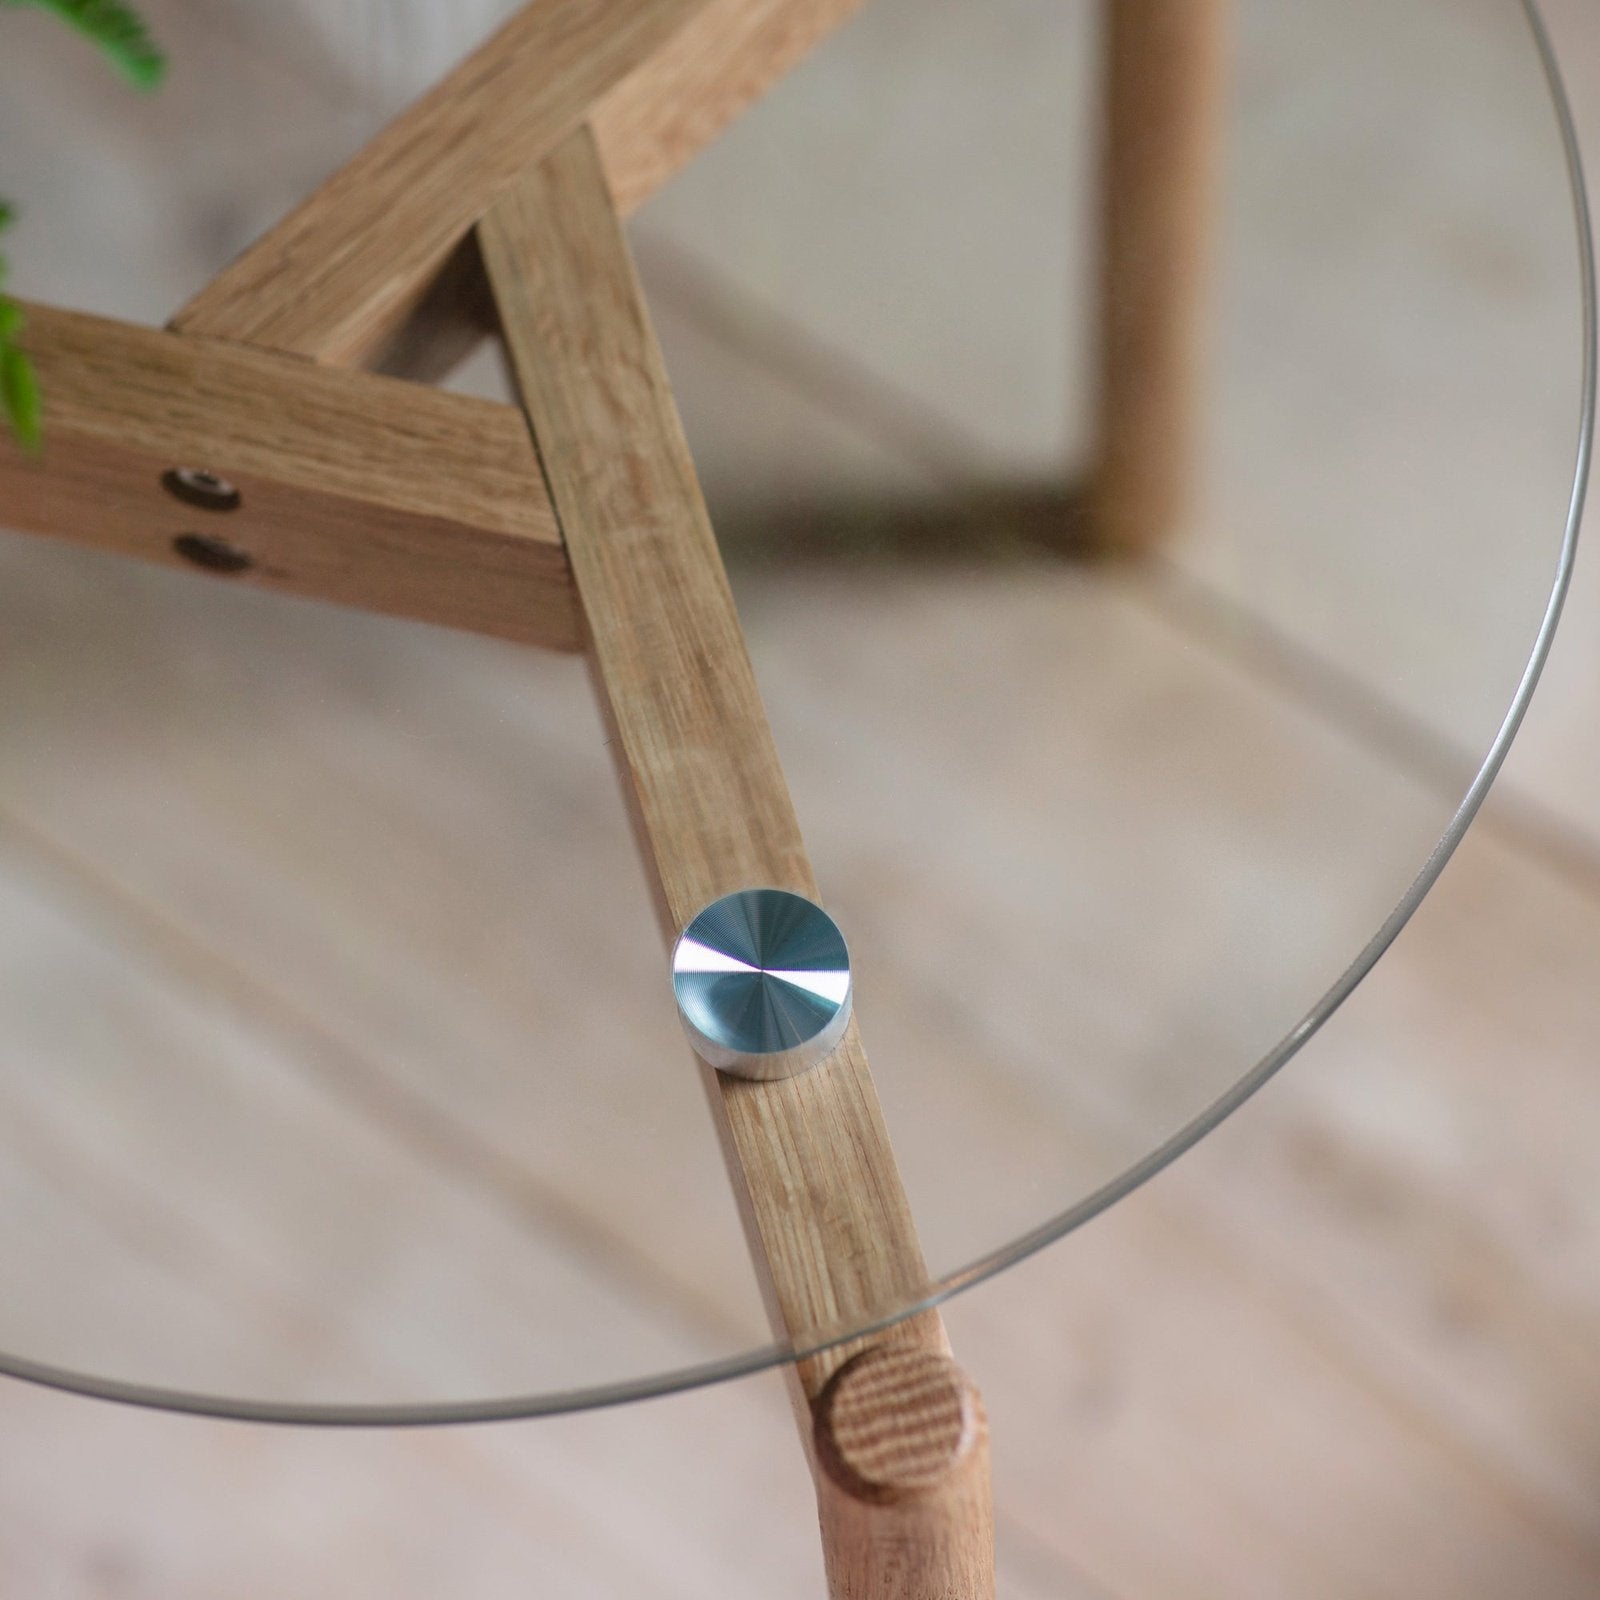 Palma Round Glass Side Table - Tempered Glass Top - Solid Oak Base